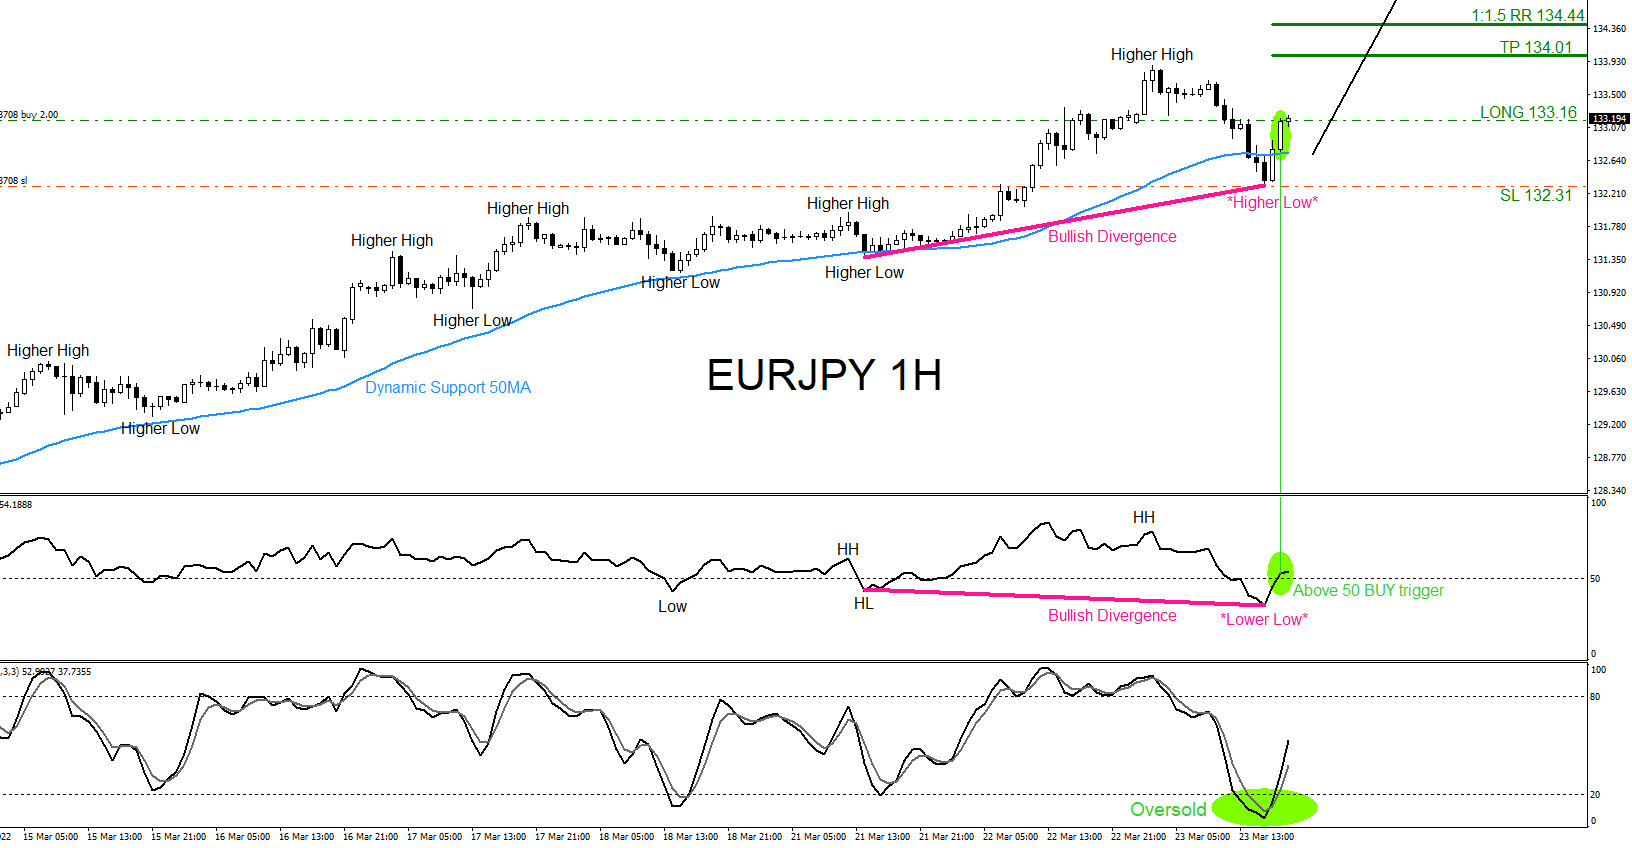 EURJPY : Trading with the Trend